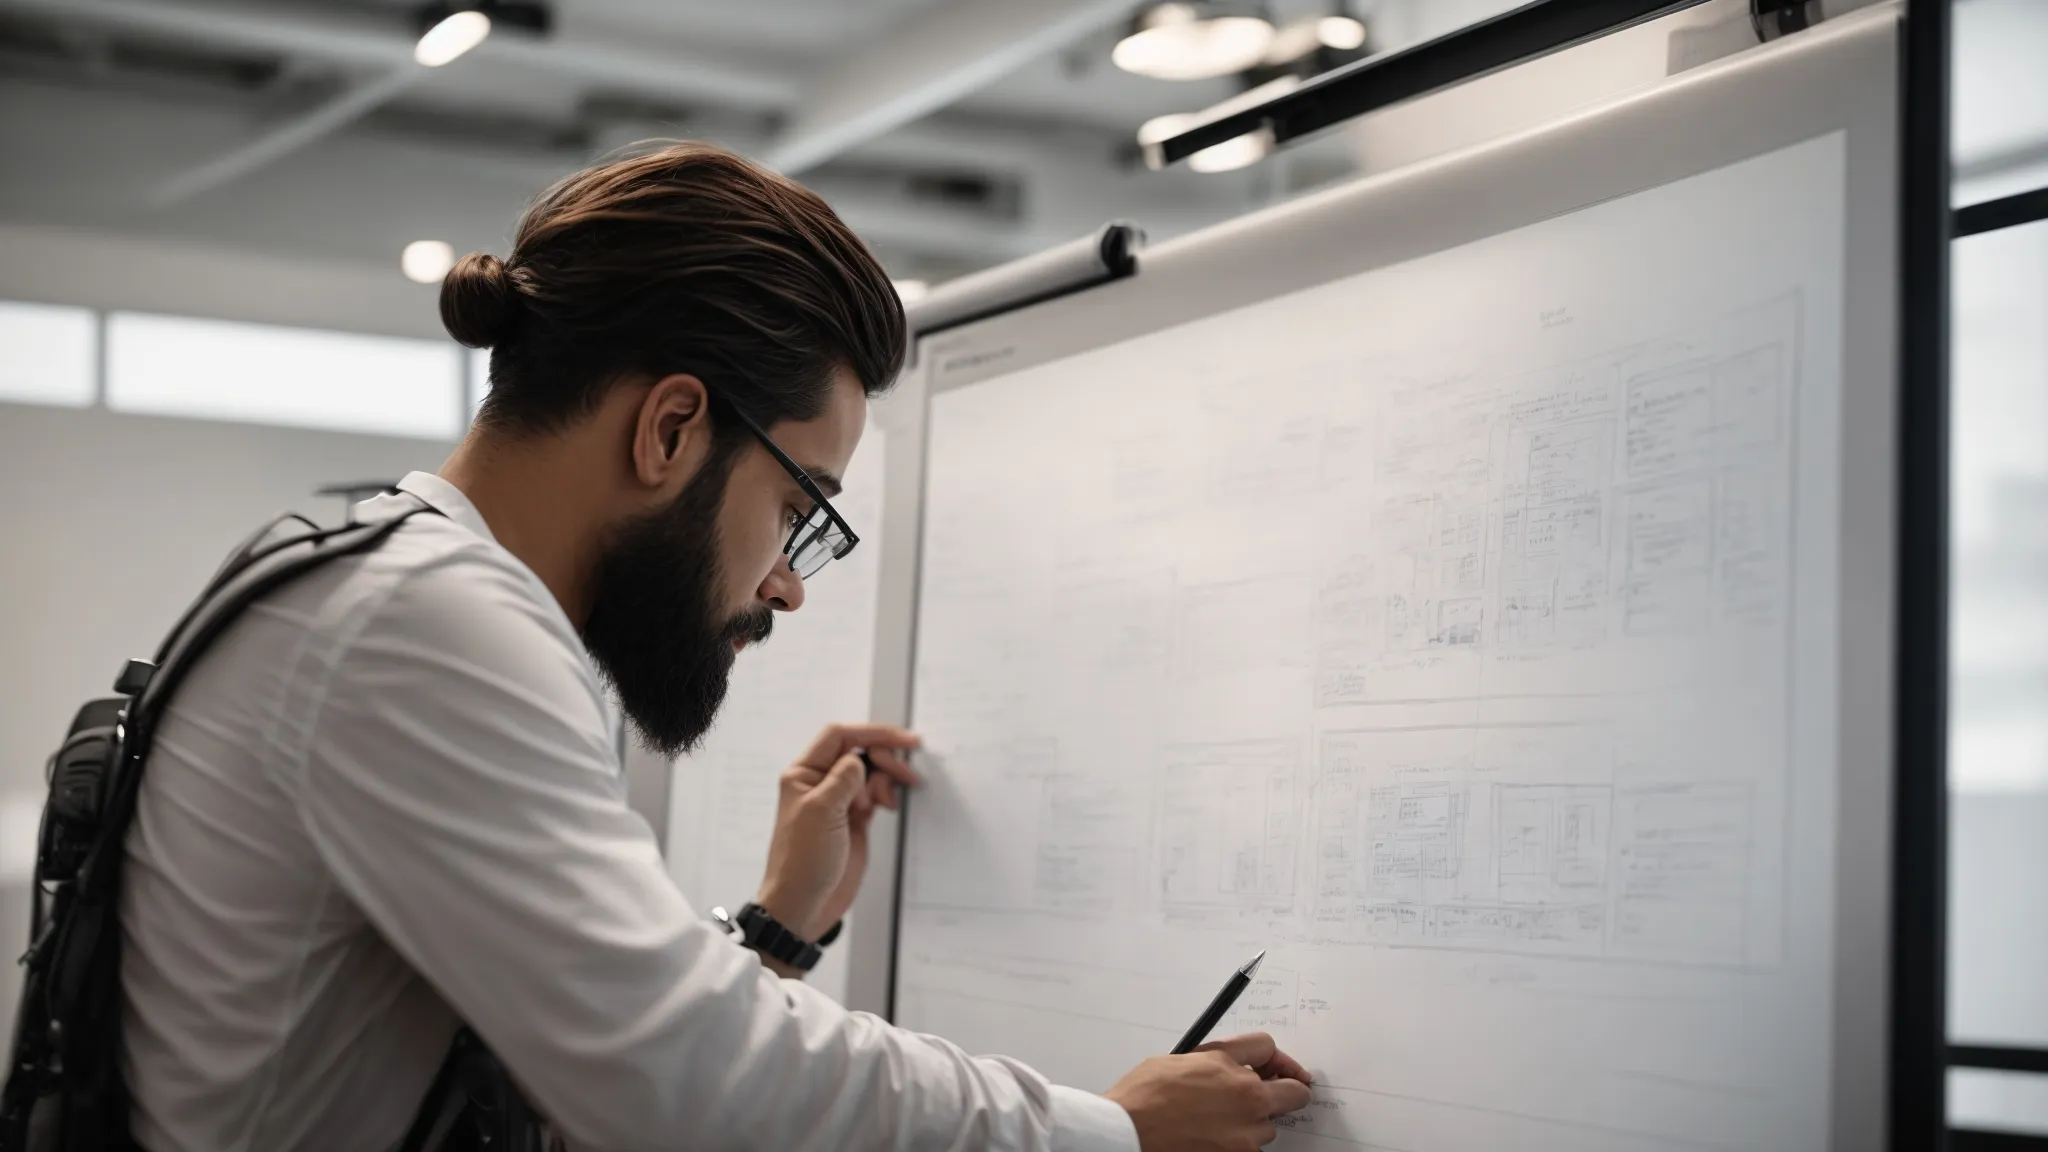 a designer sketches a responsive website layout on a whiteboard, considering how it will adapt to various devices.